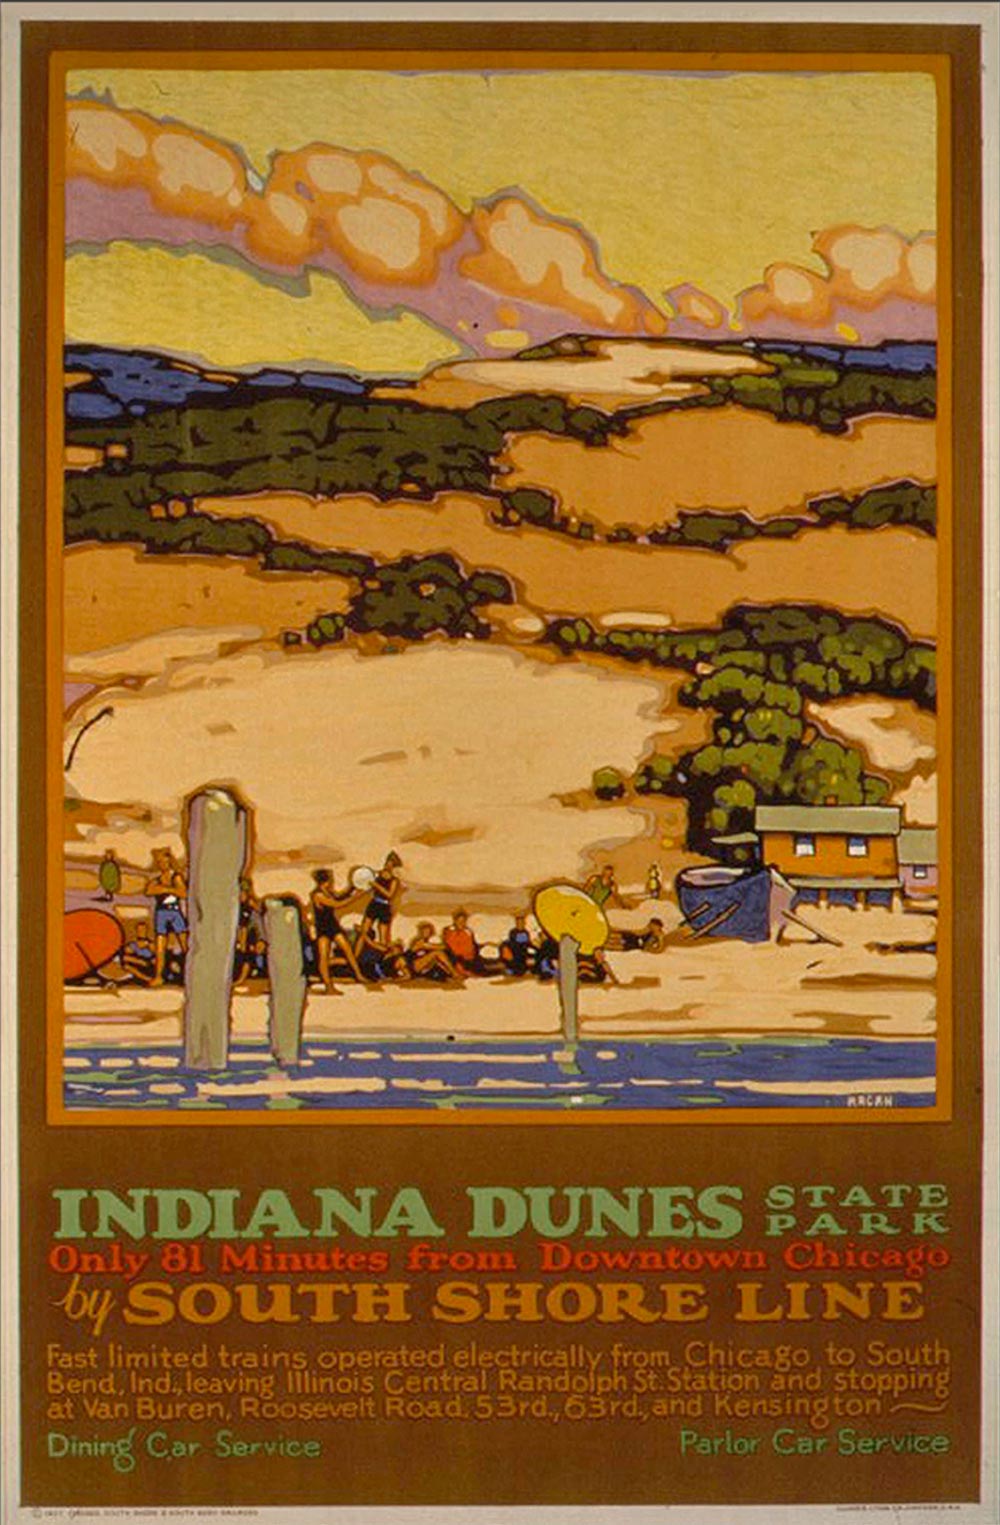 South-Shore-Line-posters-Indiana-Dunes